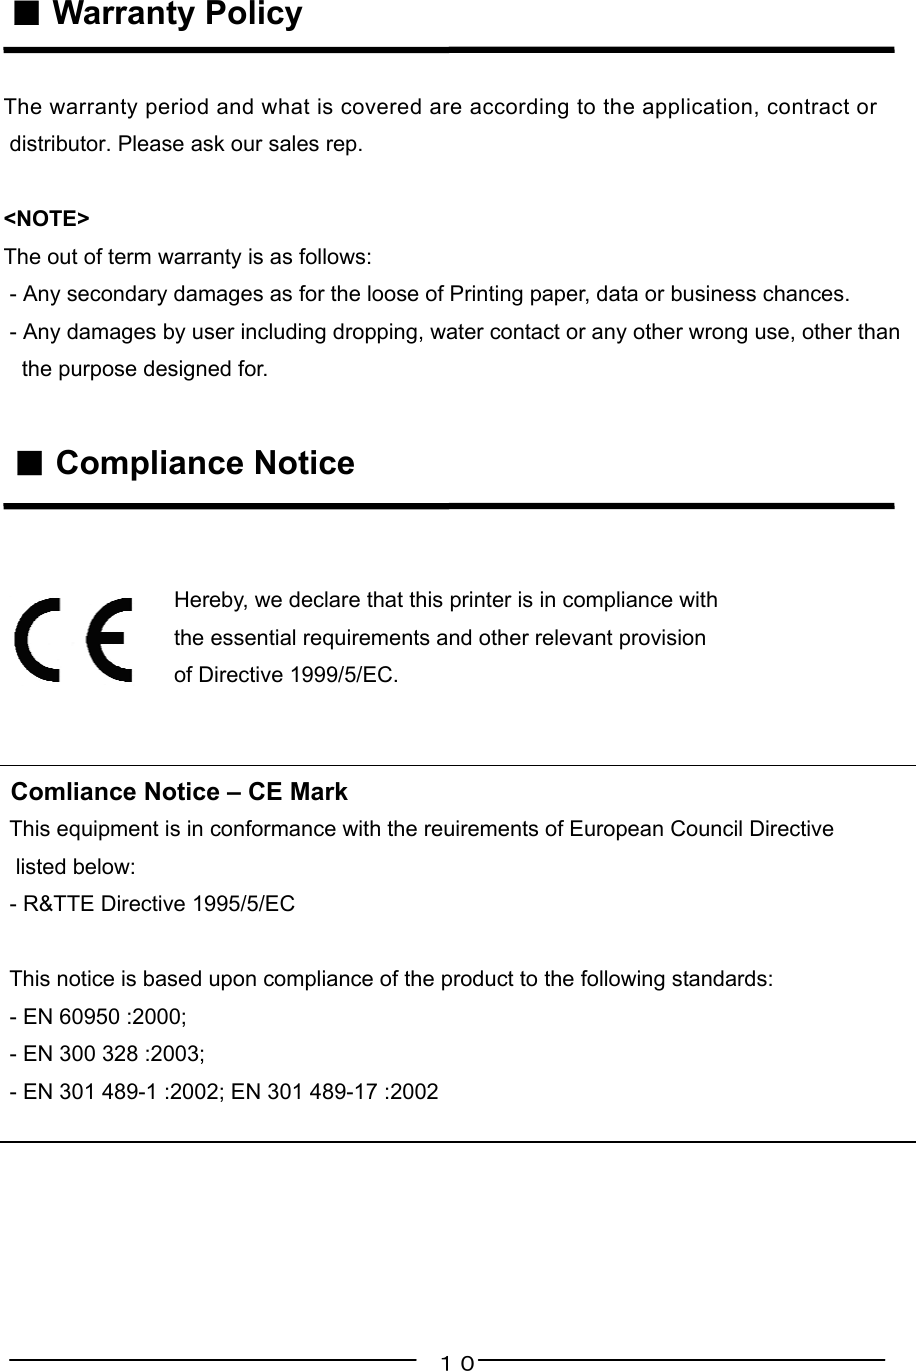 １０ ■ Warranty PolicyThe warranty period and what is covered are according to the application, contract or distributor. Please ask our sales rep.&lt;NOTE&gt;The out of term warranty is as follows: - Any secondary damages as for the loose of Printing paper, data or business chances. - Any damages by user including dropping, water contact or any other wrong use, other than   the purpose designed for. ■ Compliance Notice                            Hereby, we declare that this printer is in compliance with                            the essential requirements and other relevant provision                            of Directive 1999/5/EC. Comliance Notice – CE Mark This equipment is in conformance with the reuirements of European Council Directive  listed below: - R&amp;TTE Directive 1995/5/EC   This notice is based upon compliance of the product to the following standards: - EN 60950 :2000; - EN 300 328 :2003; - EN 301 489-1 :2002; EN 301 489-17 :2002